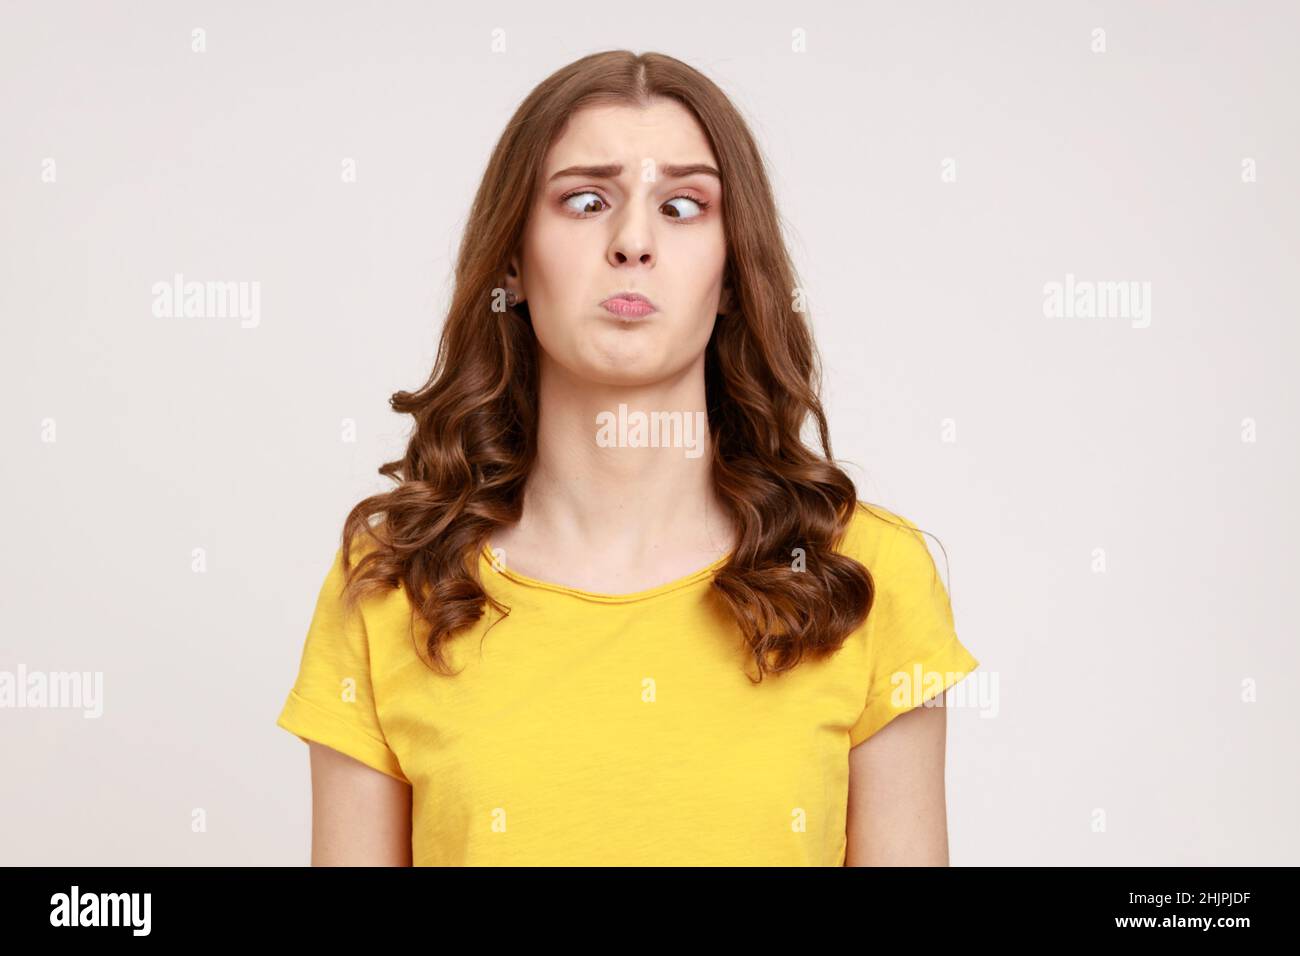 Portrait of attractive funny silly young woman in yellow T- shirt with cross eyed, has stupid dumb face, awkward confused comical expression. Indoor studio shot isolated on gray background. Stock Photo